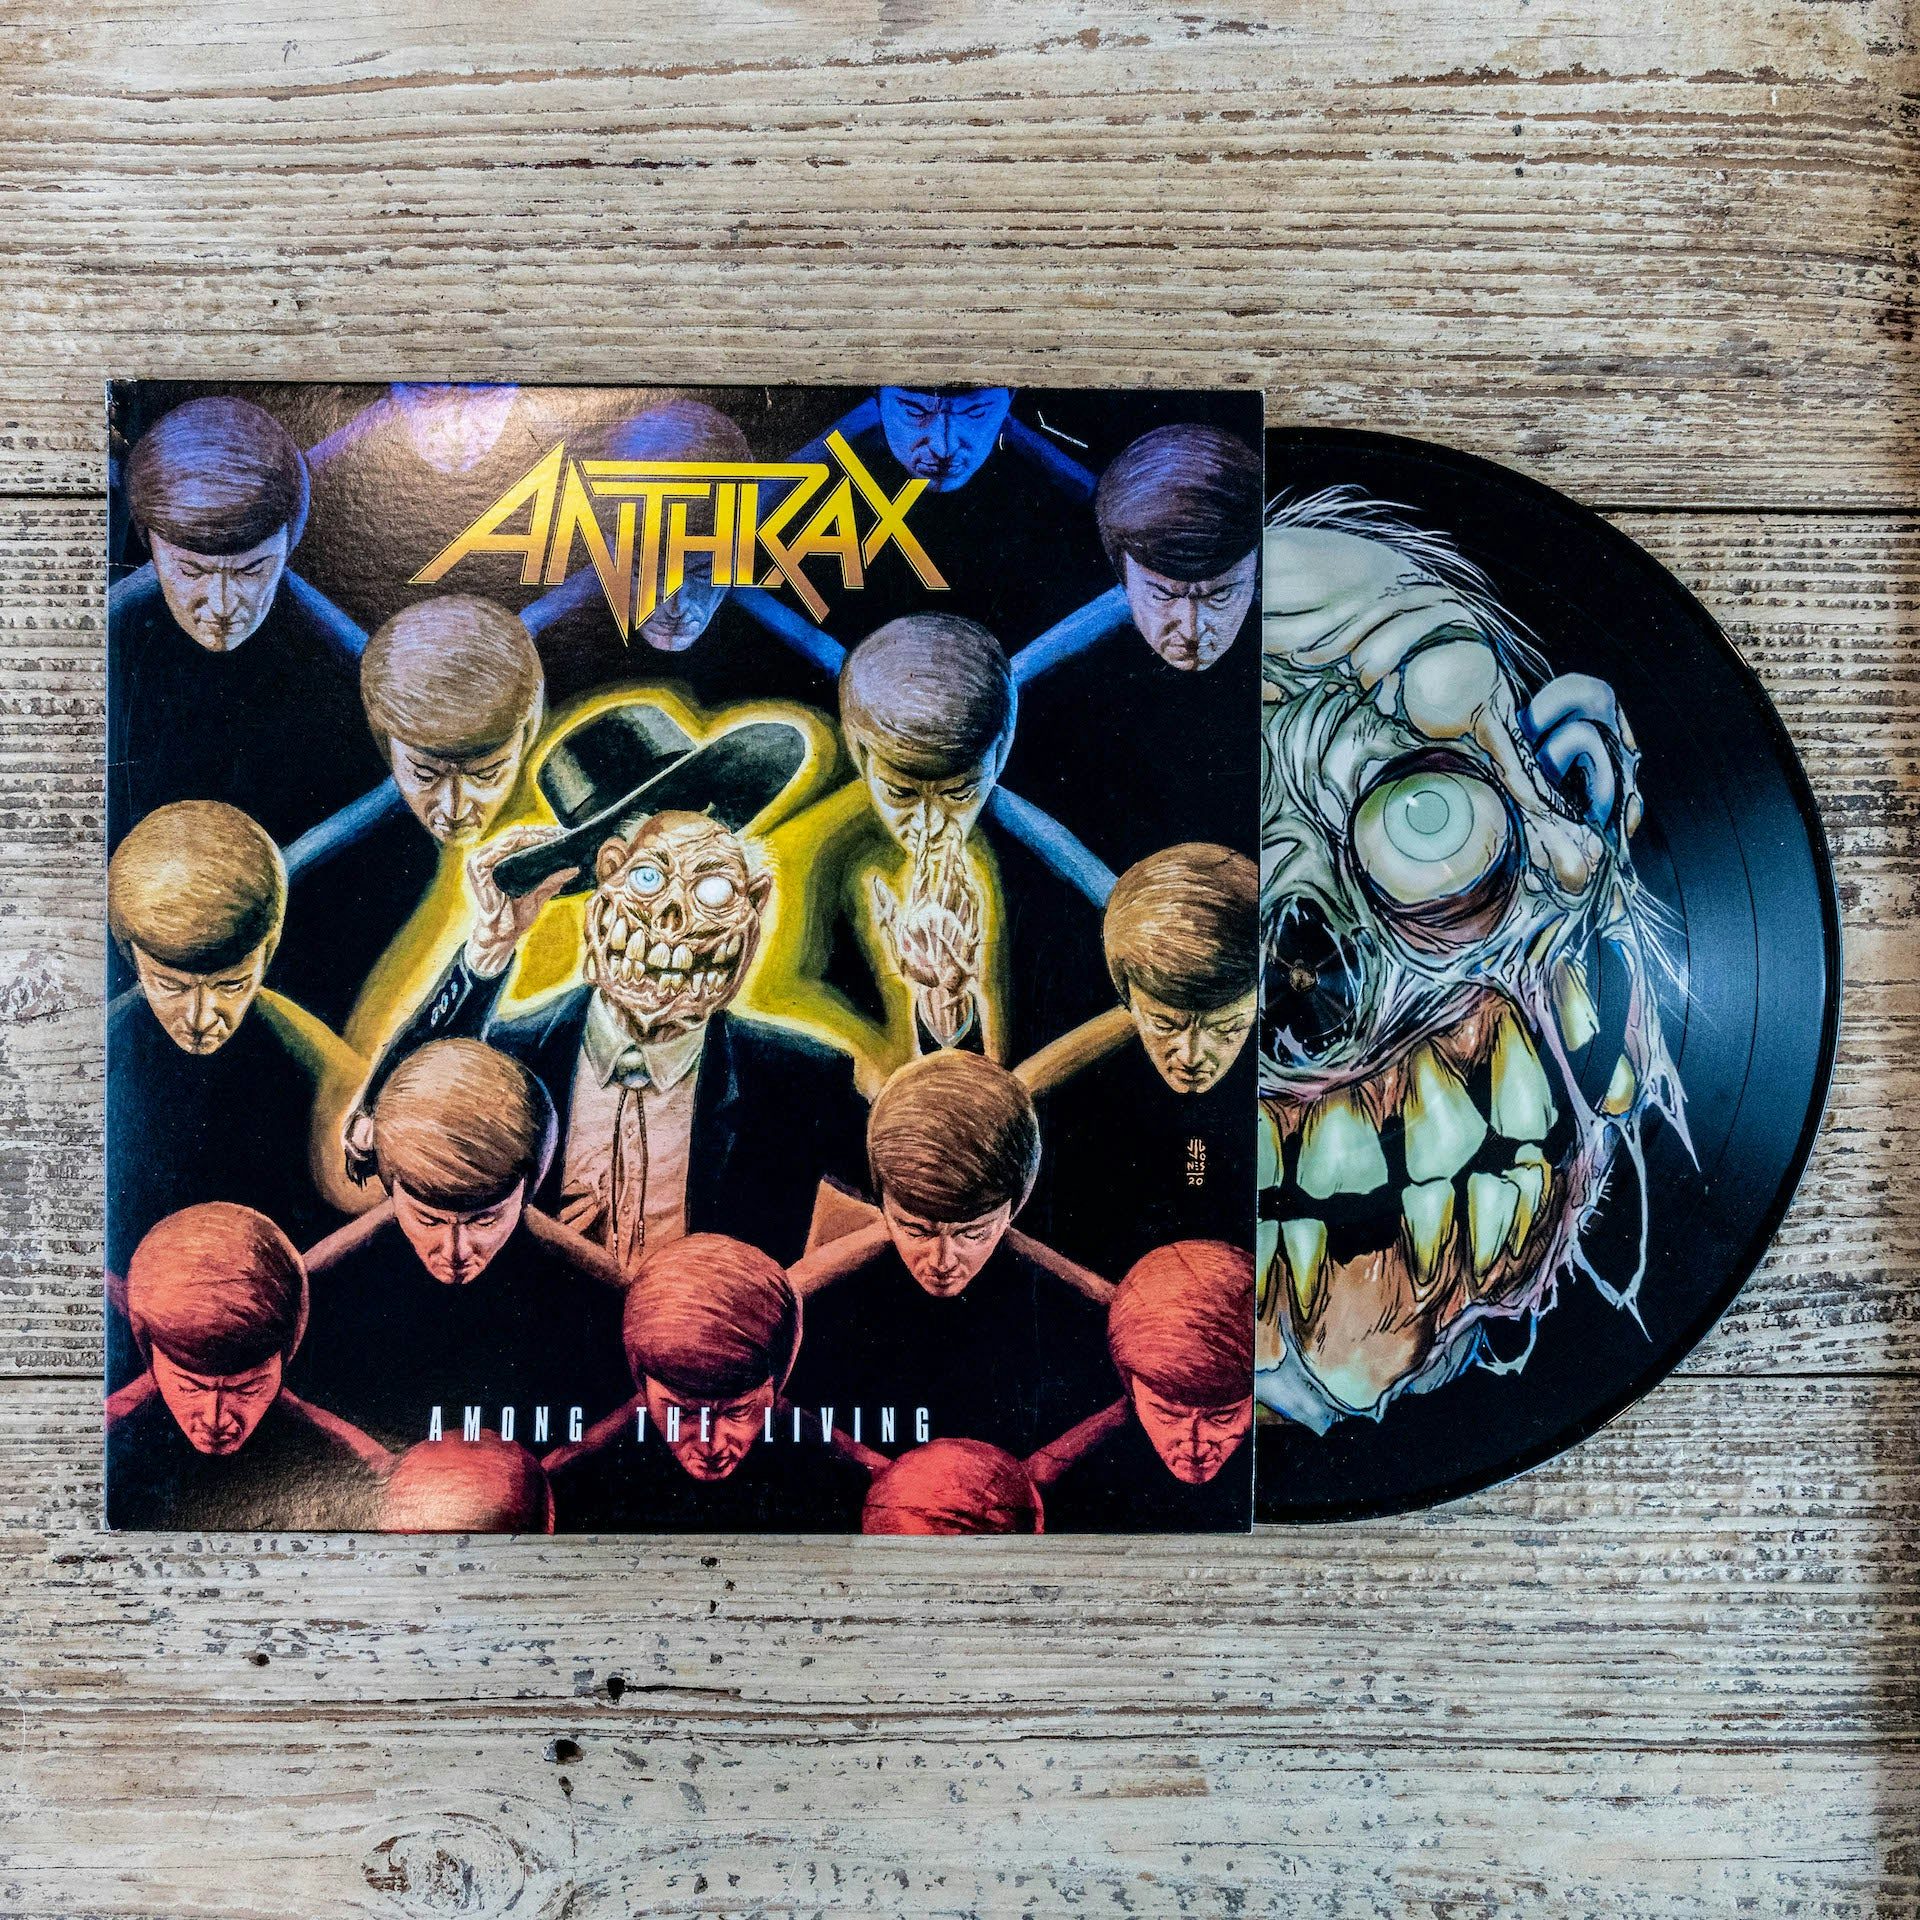 Anthrax Among the Living - Exclusive Vinyl Picture Disc LP $35.00